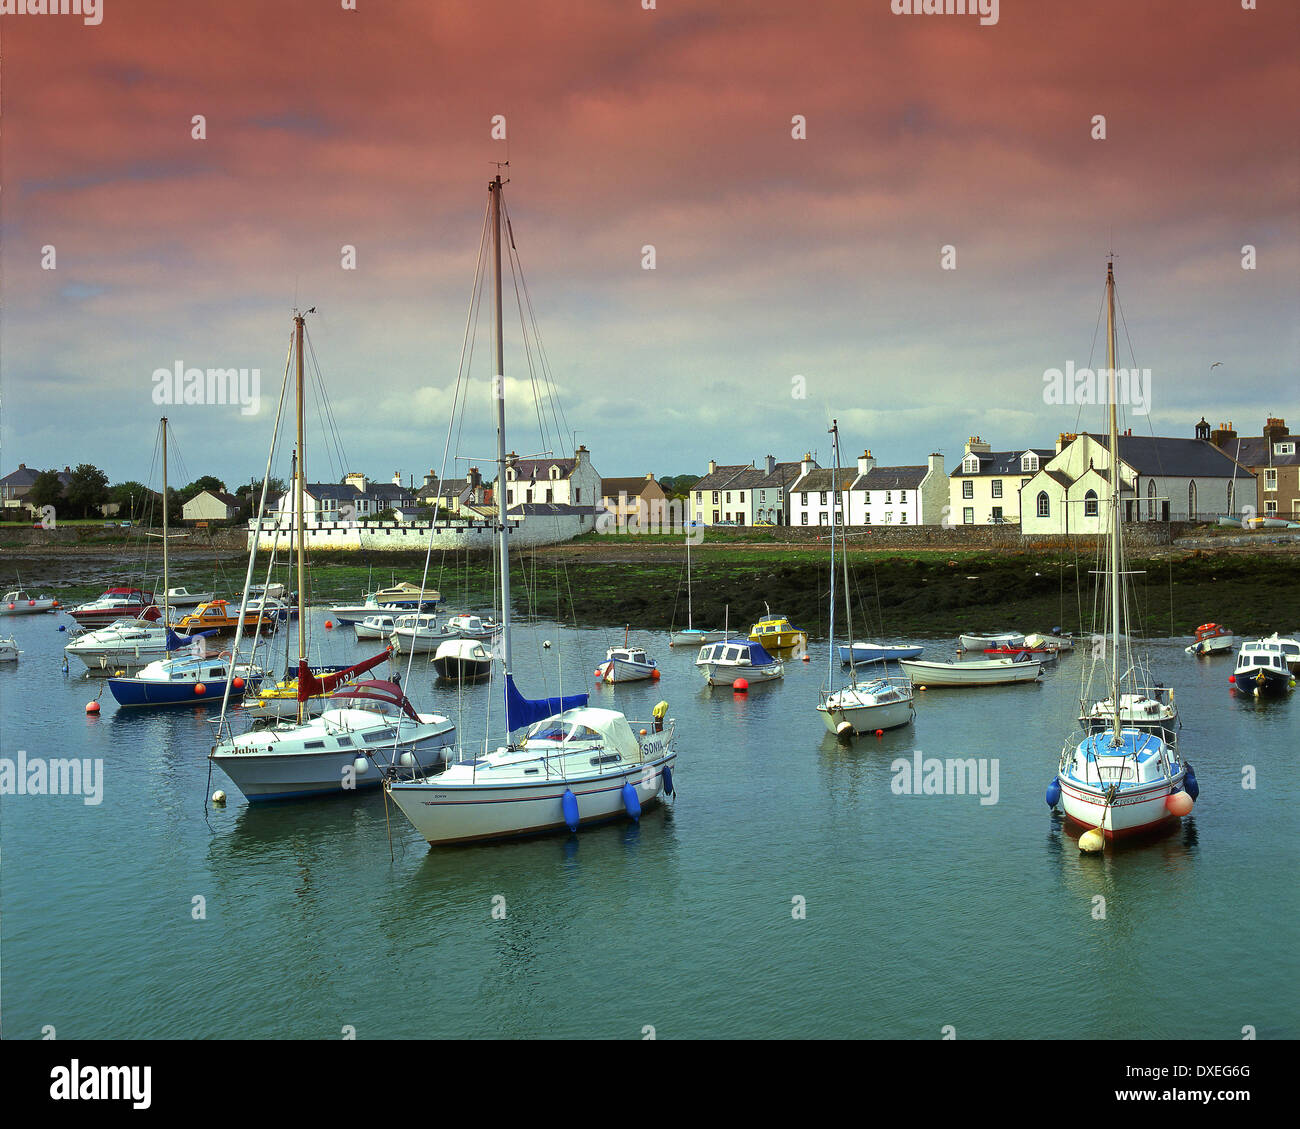 Isle of Fund, Wigtownshire, Dumfries & Galloway Stockfoto